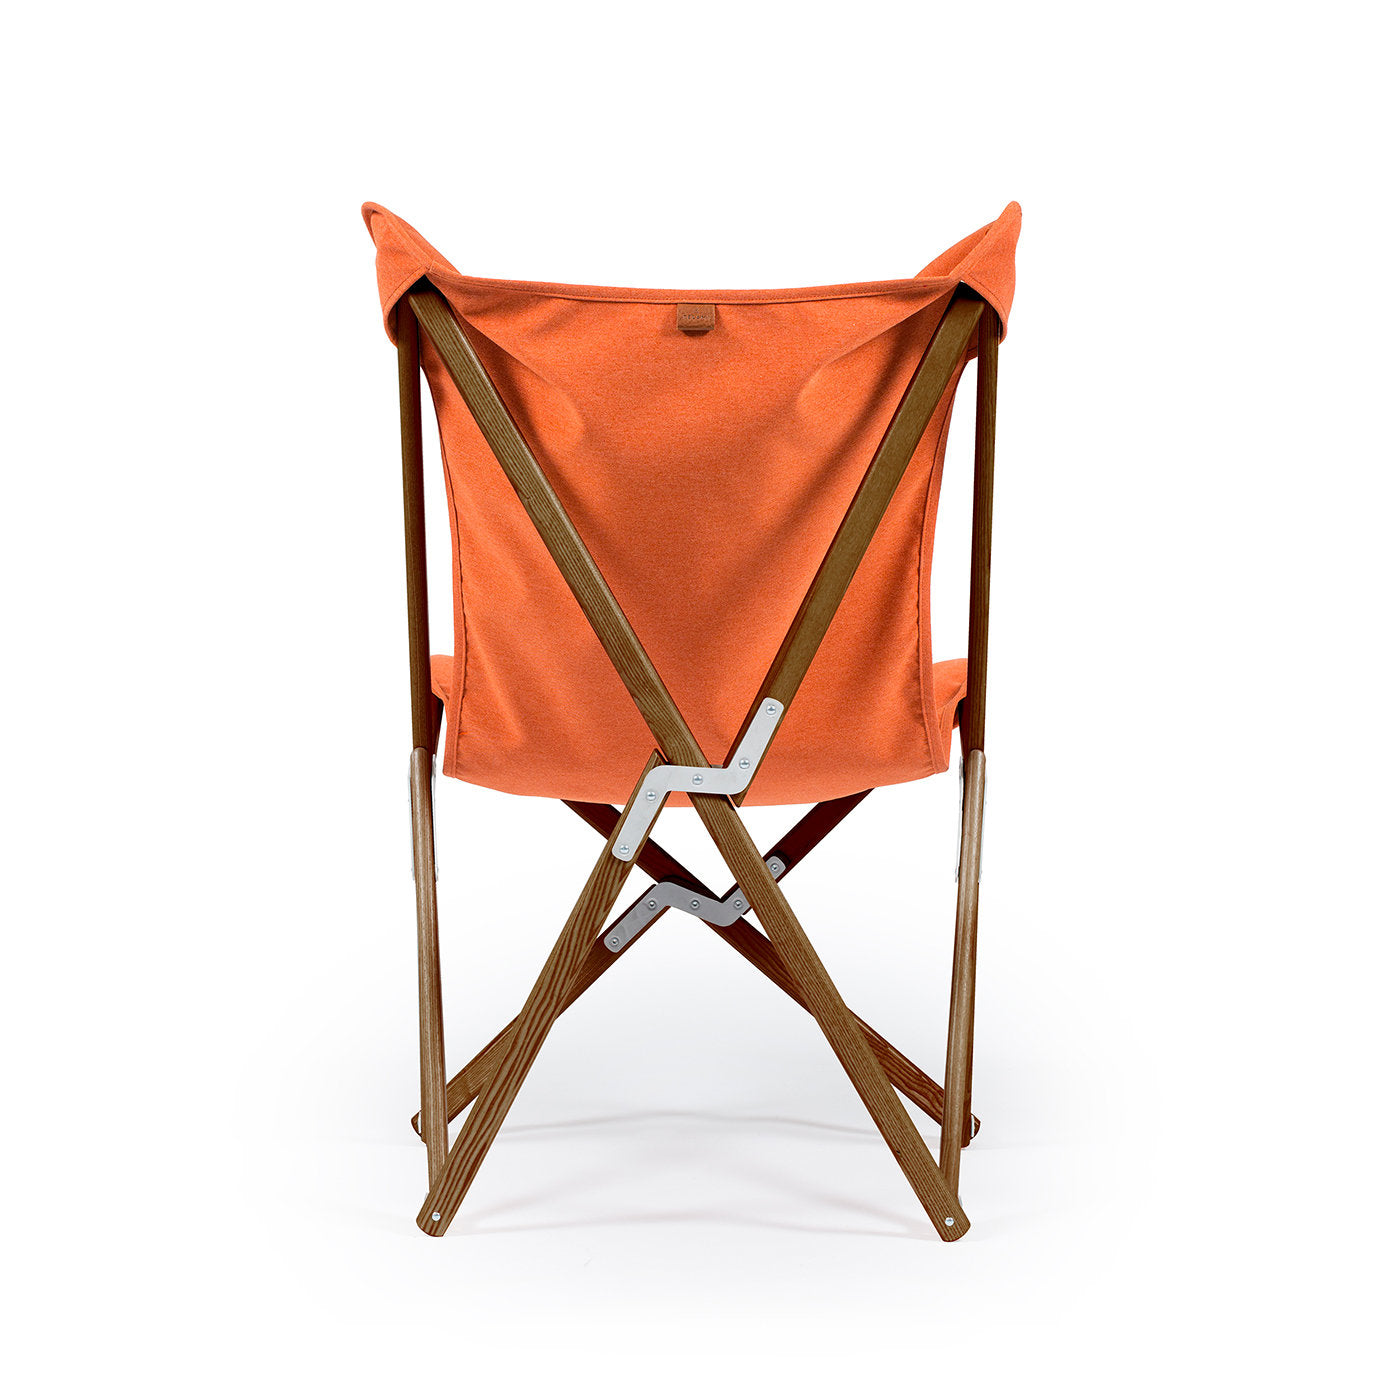 Tripolina Chair in Terracotta Red - Alternative view 3